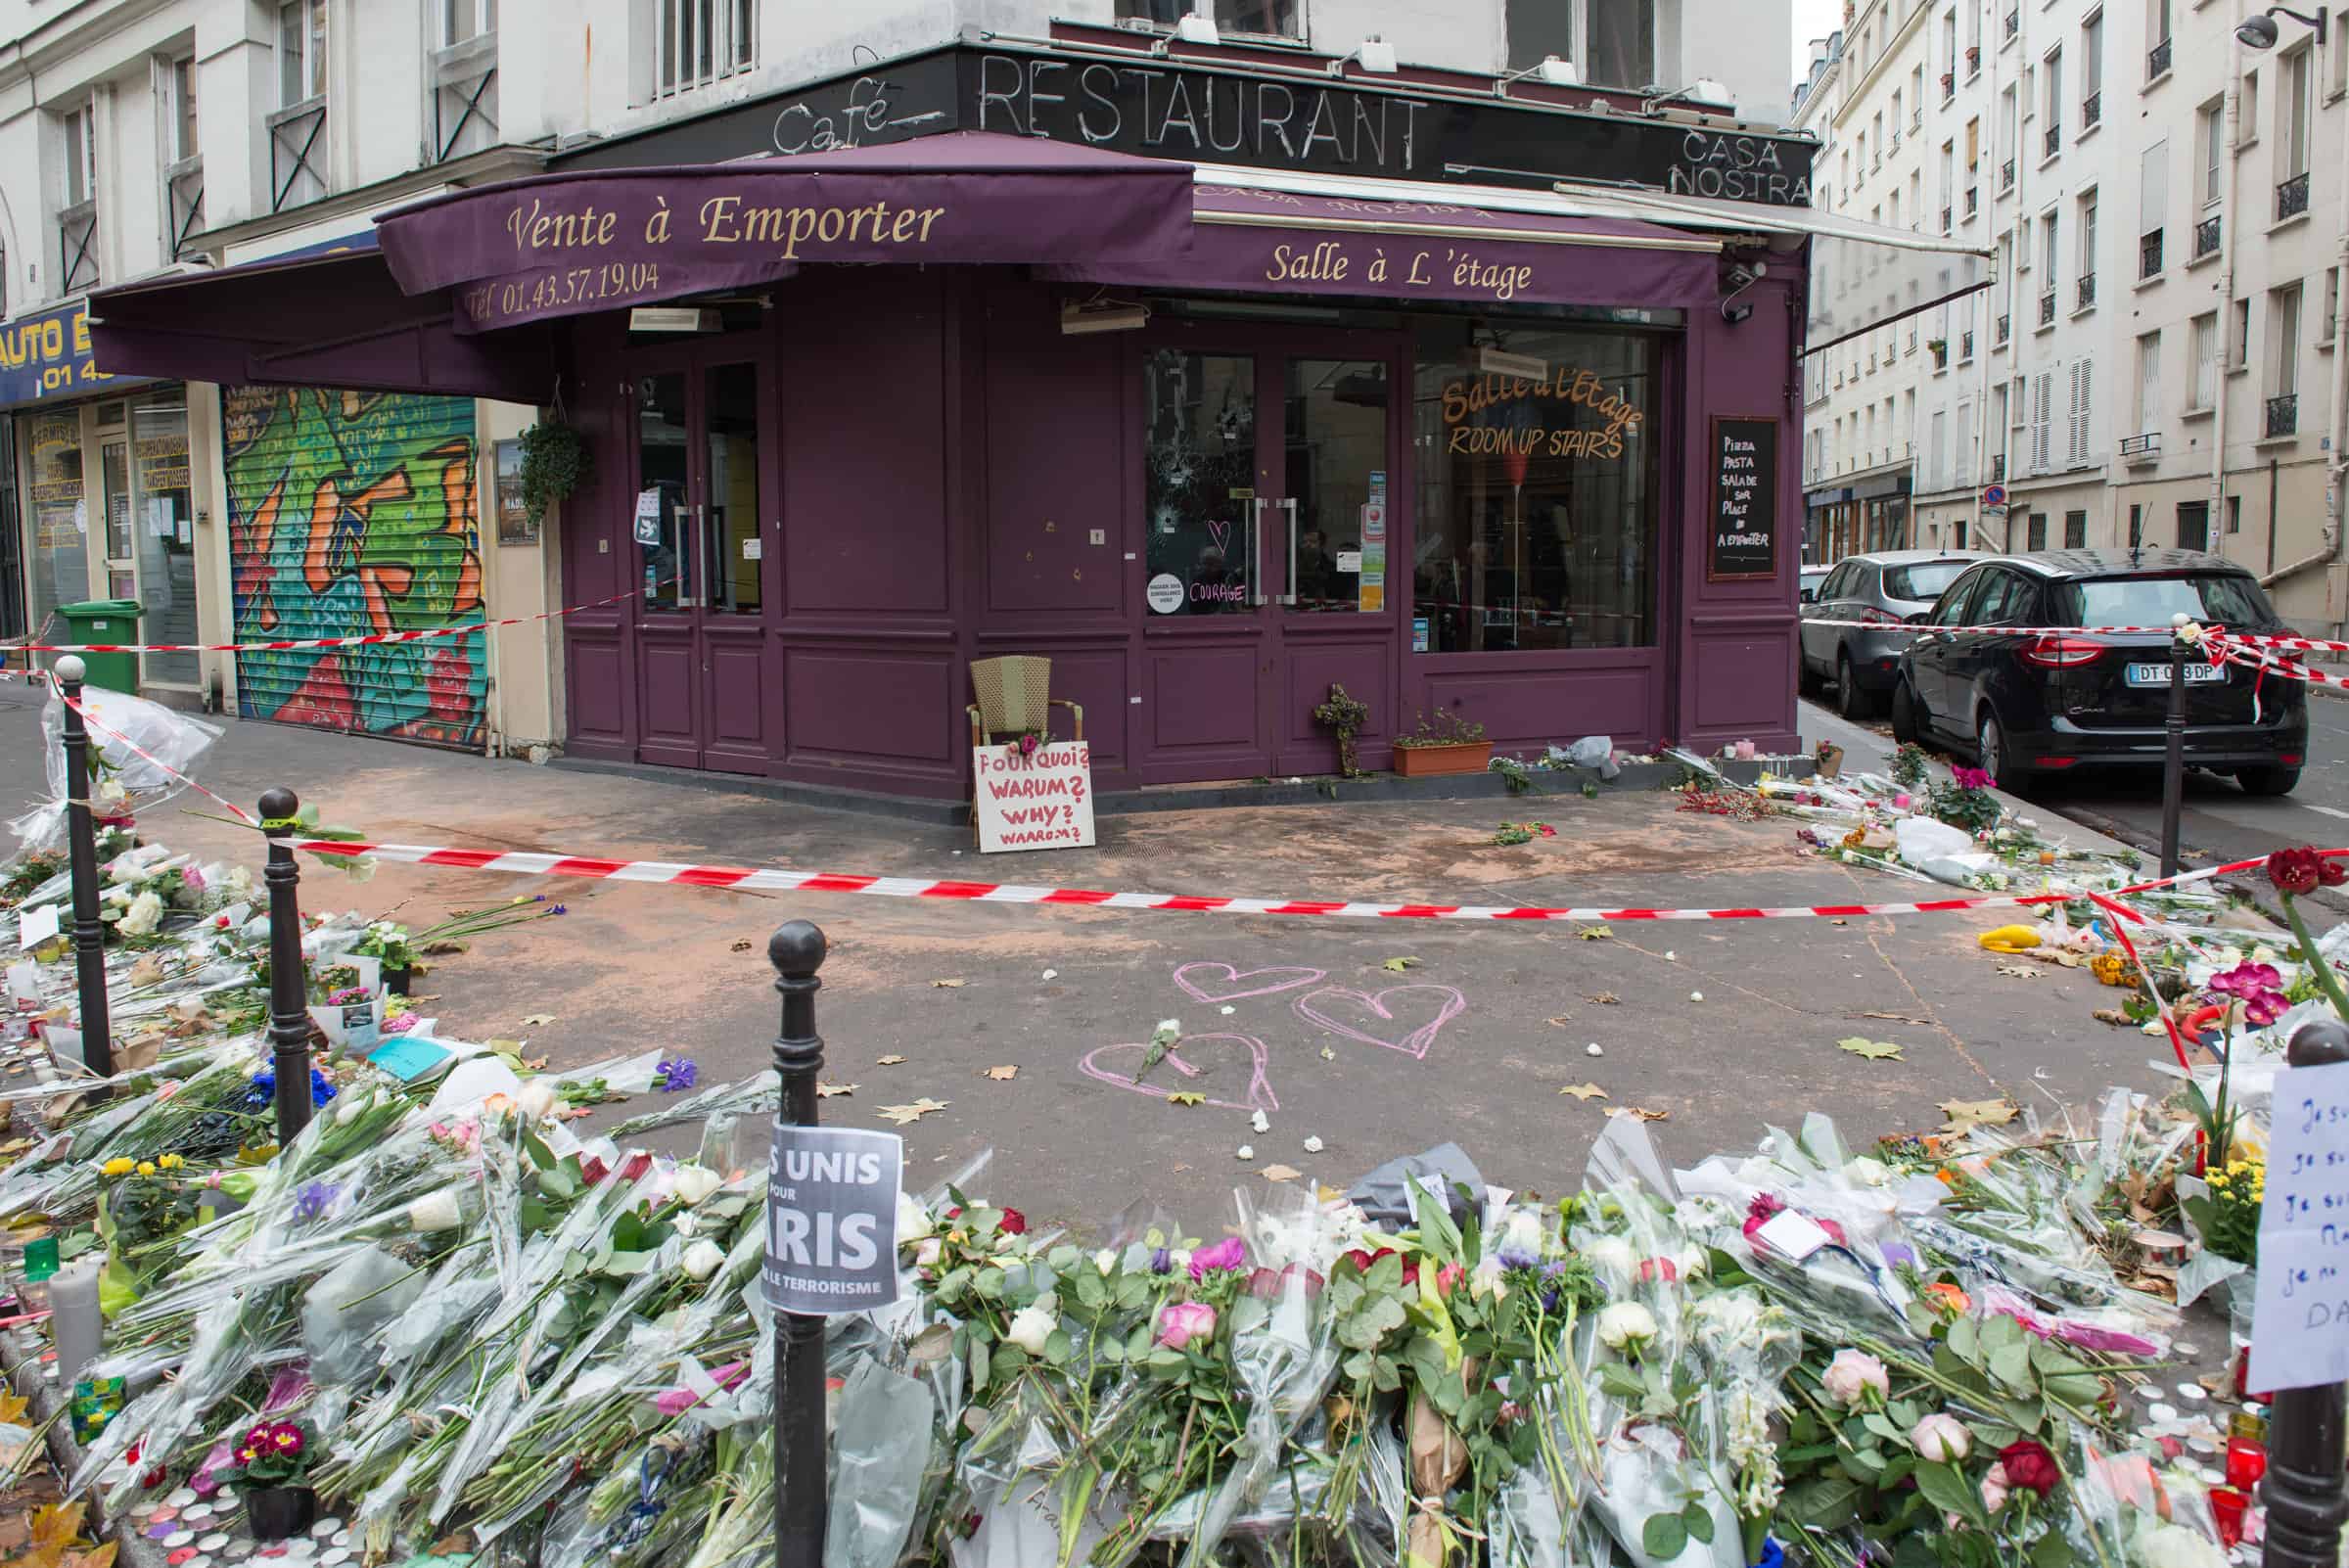 Je suis Paris. Images of peace and hope. Despite the barrier, people have drawn chalk hearts to accompany the flowers in front of Le Petit Cambodge. Palmyre Roigt for the HiP Paris Blog